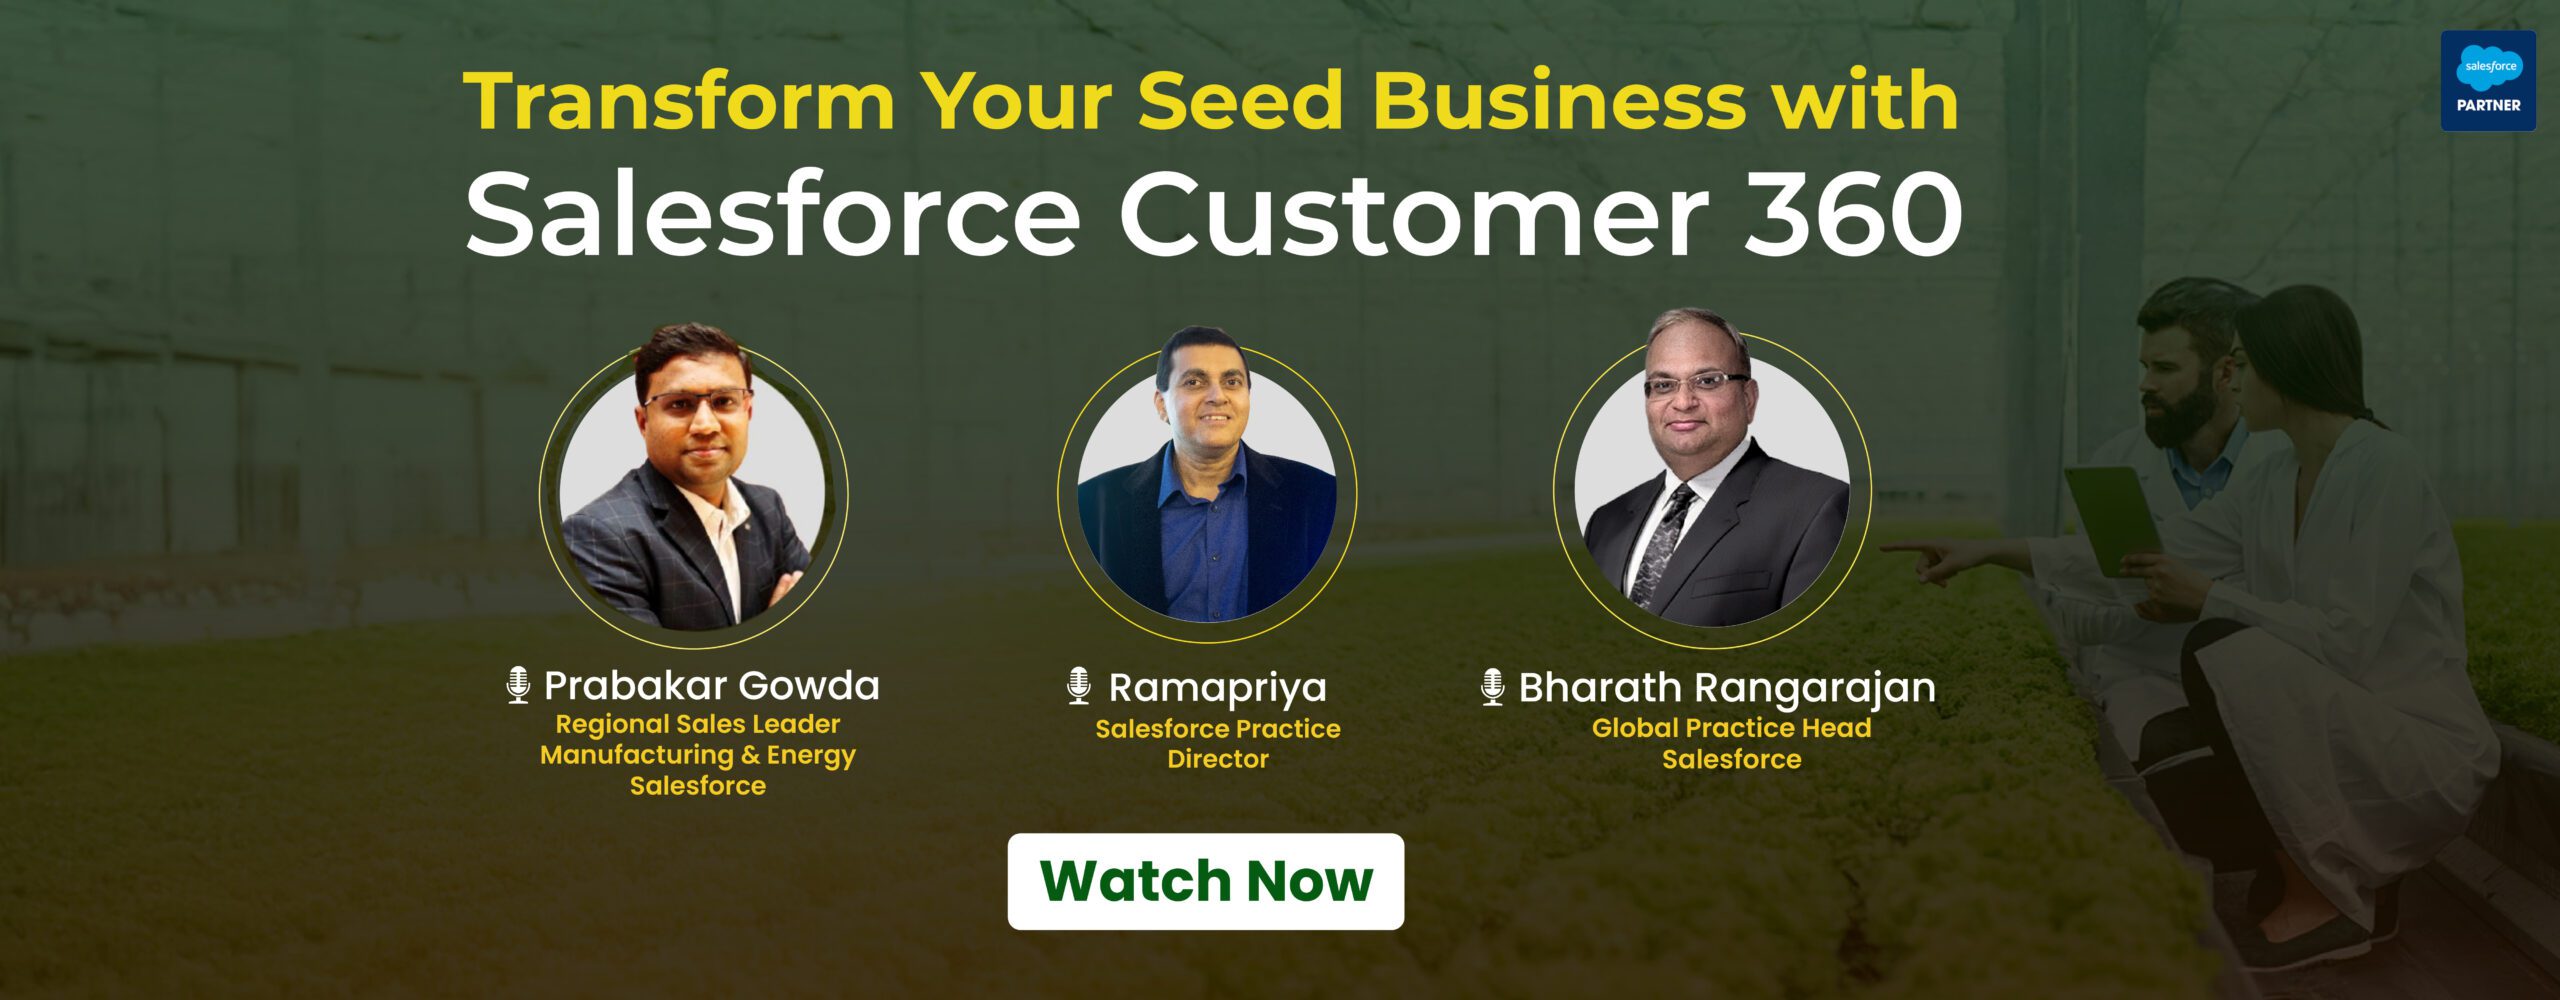 Transform Your Seed Business with Salesforce Customer 360